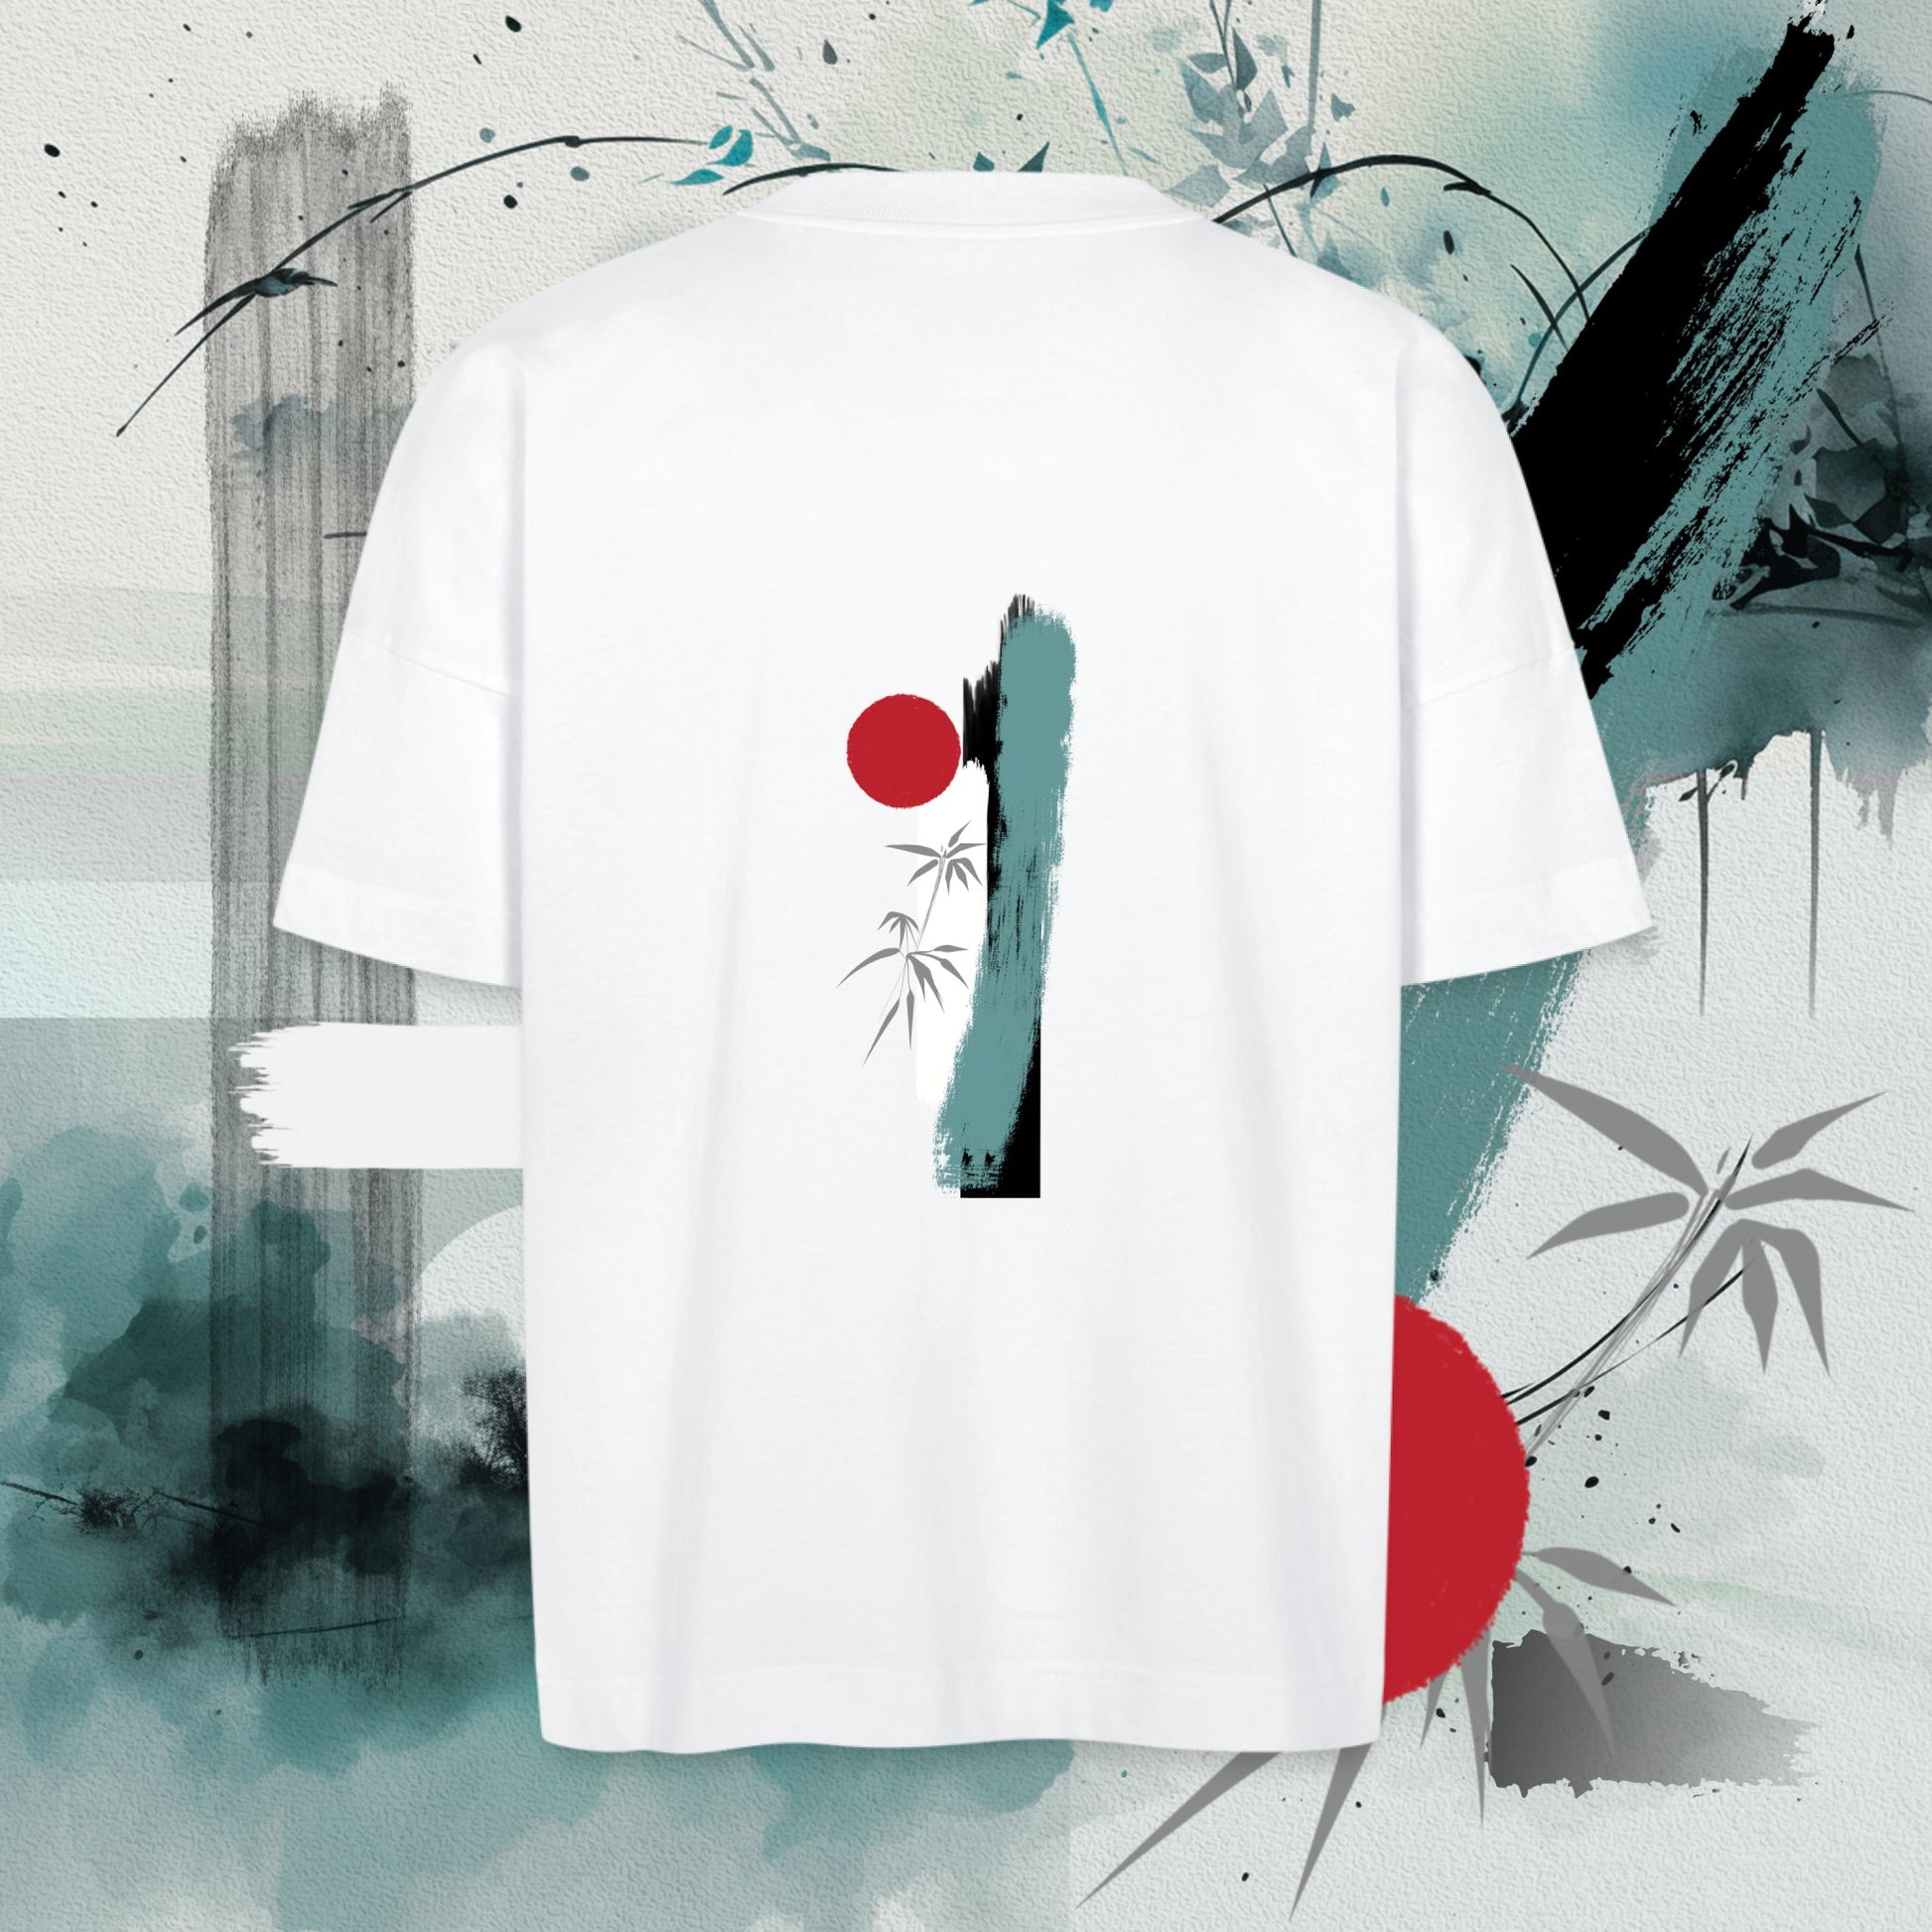 Mizu Unisex Oversize Organic T-shirt | ZENGA Collection by Tōyō  - Experience room to be you with Mizu, the Unisex Oversize Organic T-shirt from the ZENGA Collection by Tōyō. This relaxed all-rounder features a loose fit, wide stand-up collar, and a backside art print by Tōyō. Crafted from 100% cotton with a sturdy fabric weight of 200 g/m², it's the epitome of casual cool.